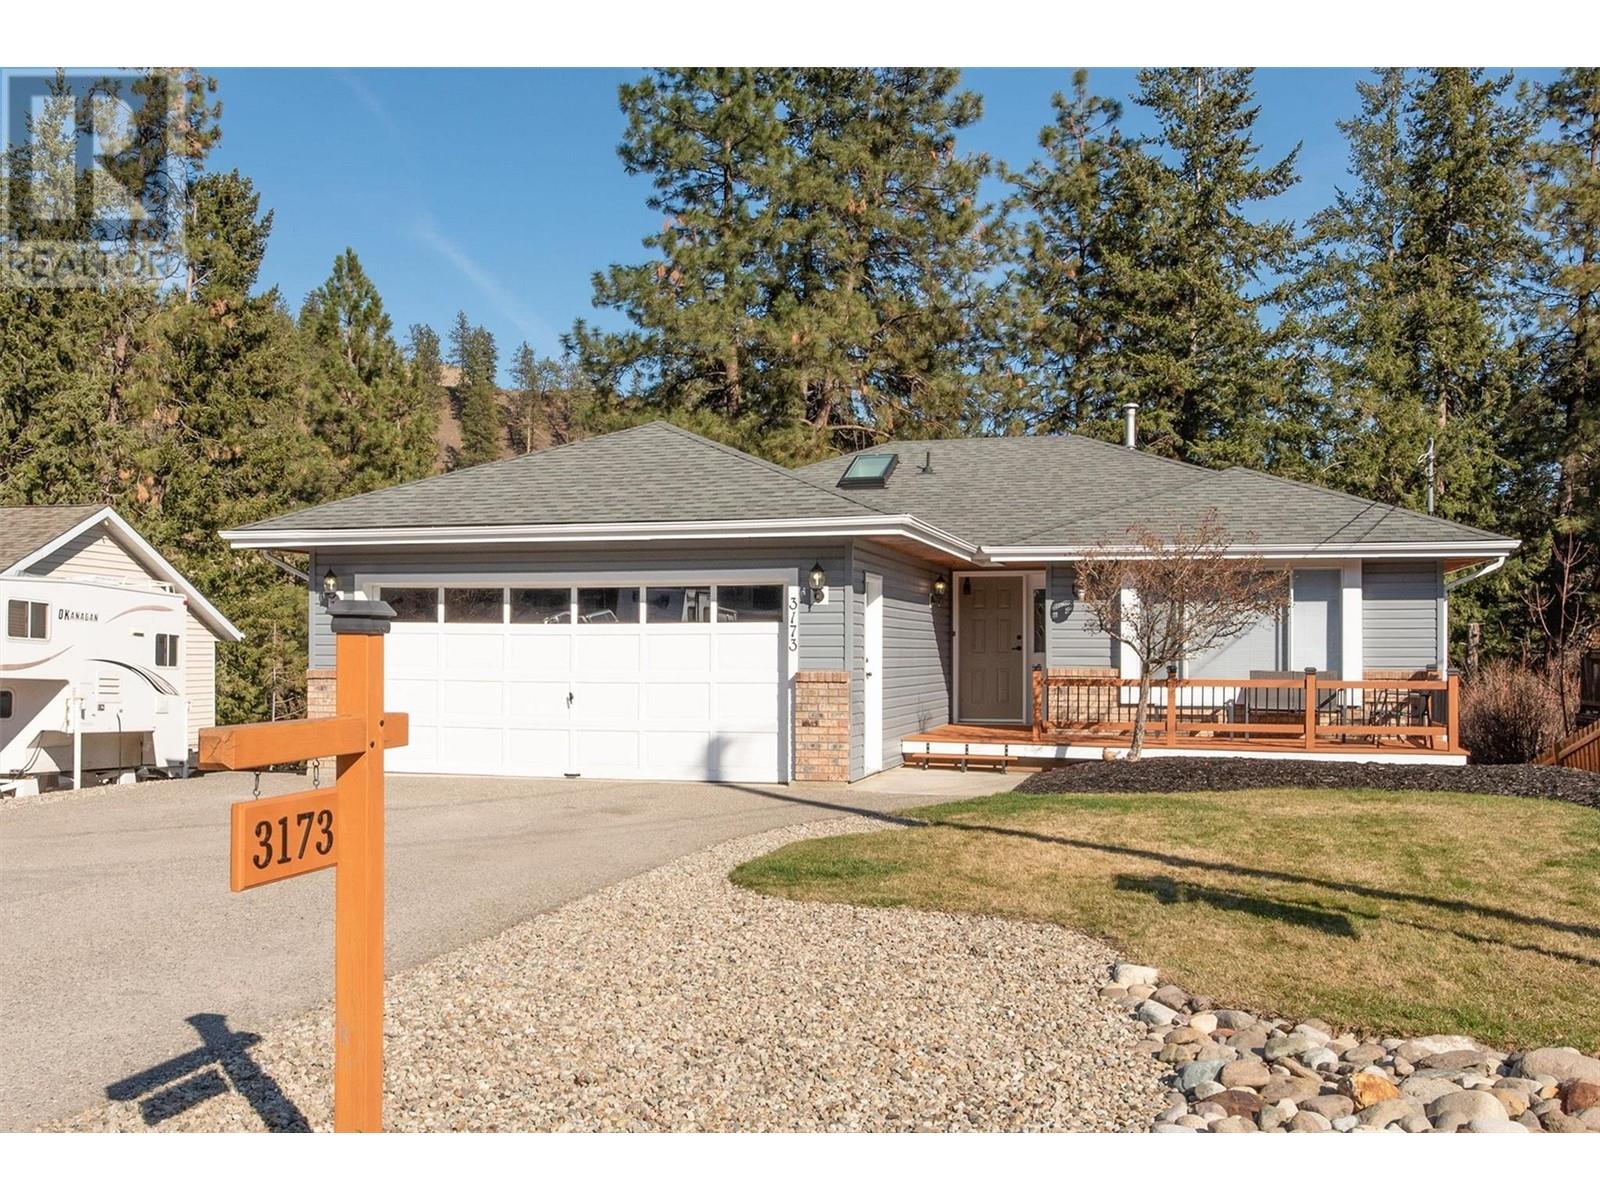  3173 Coventry Crescent, West Kelowna